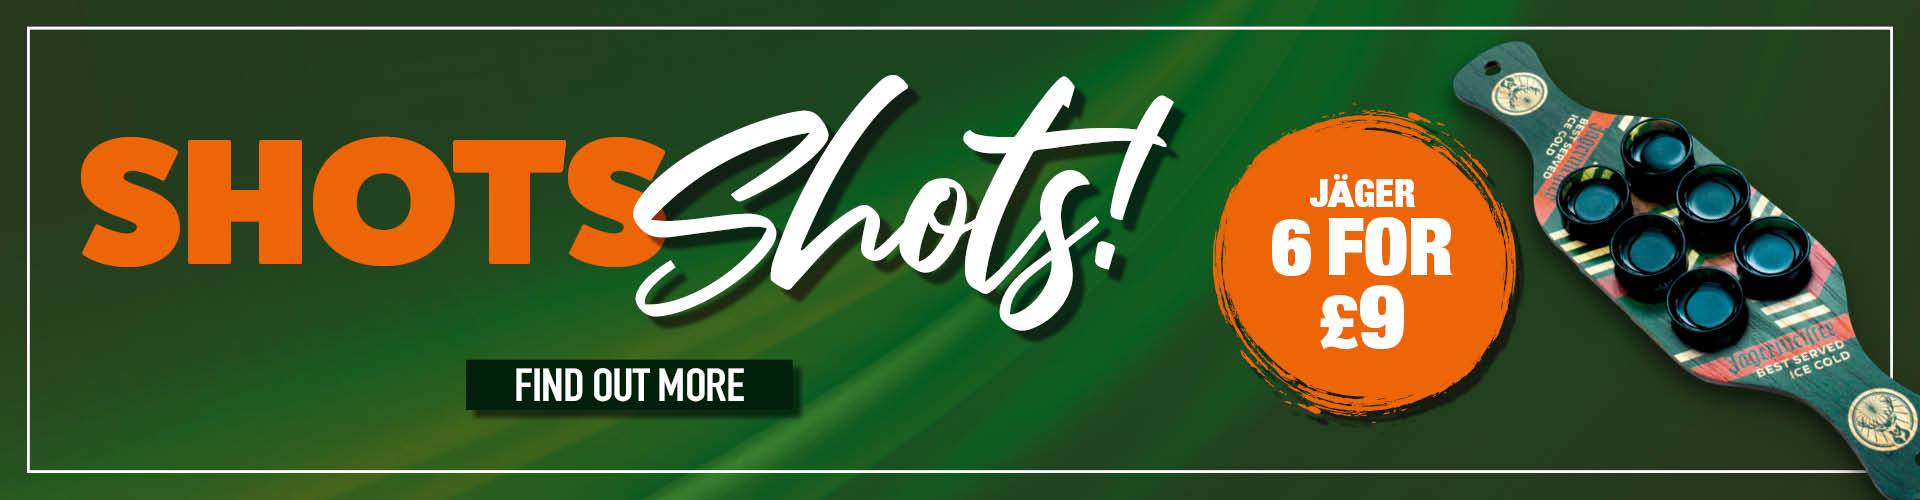 Shots shots - Jager - 6 for £9